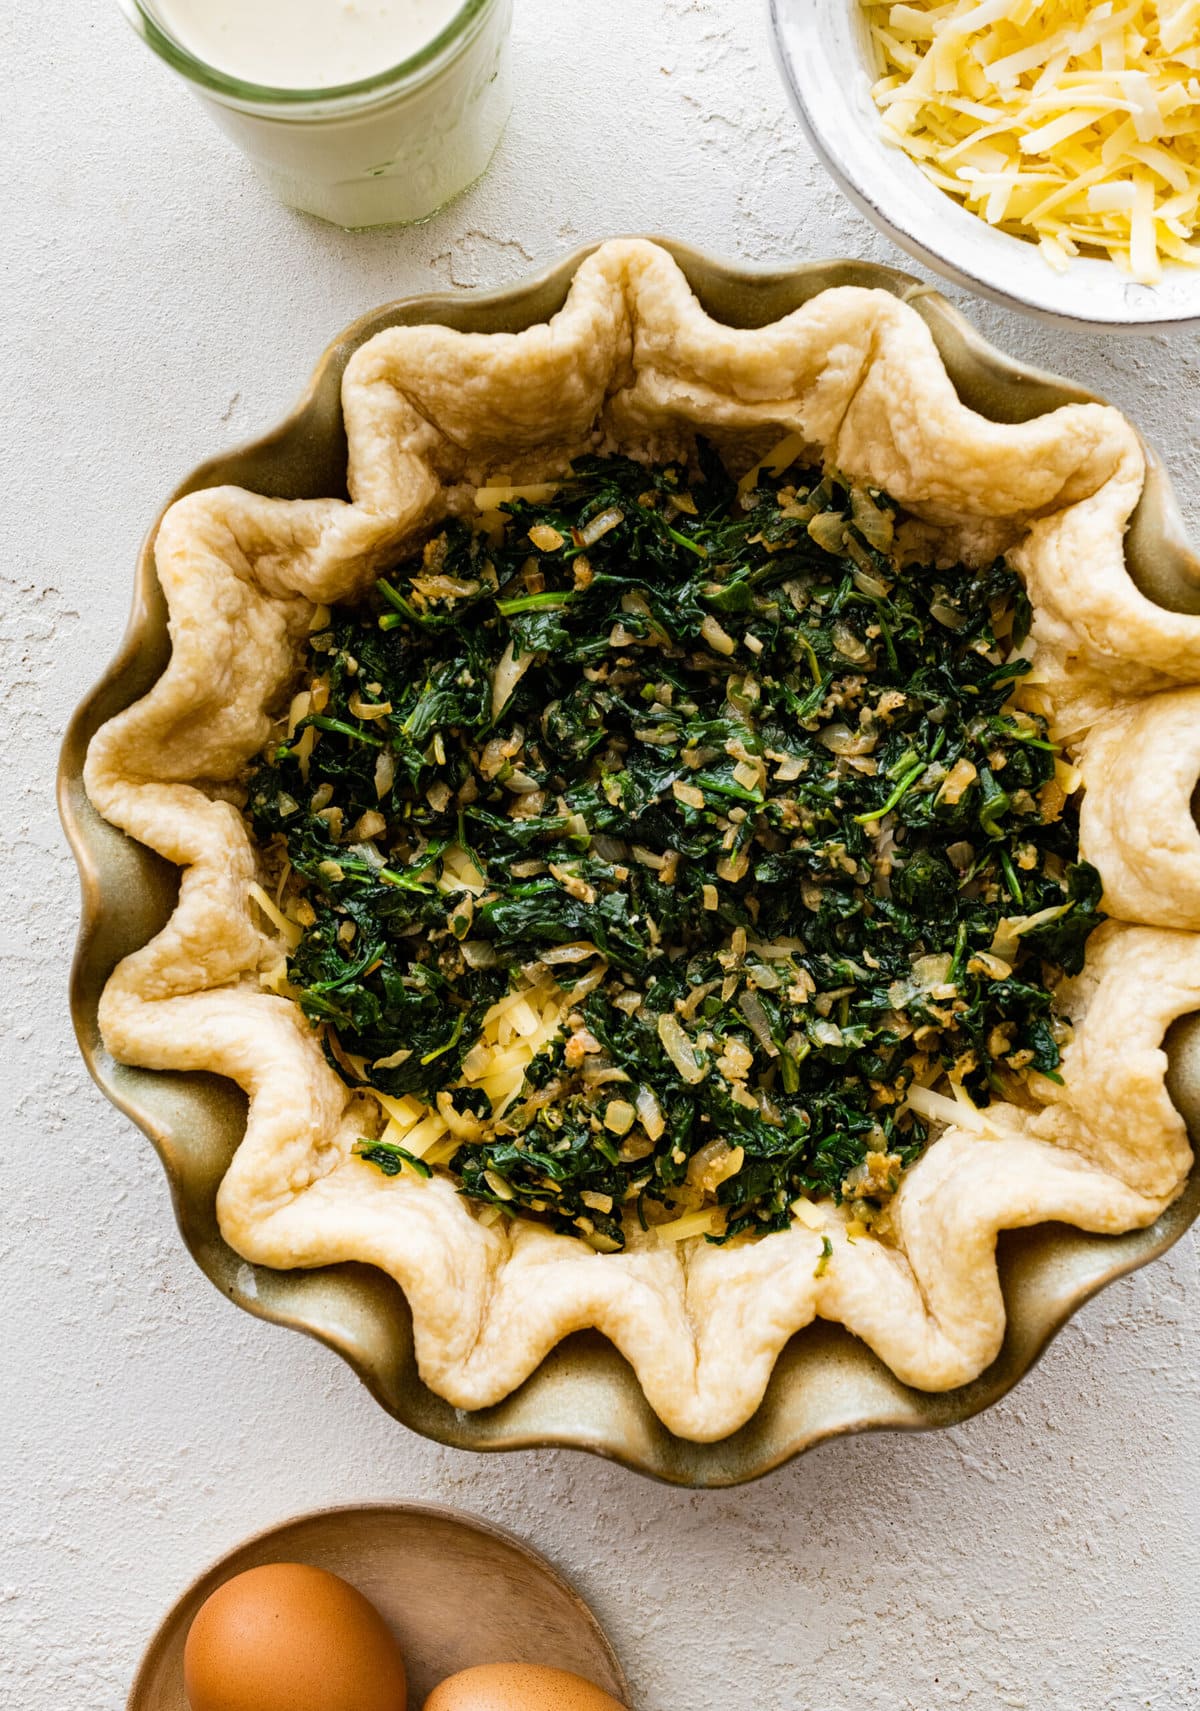 How to make spinach quiche step-by-step: add cooked spinach on top of the cheese.